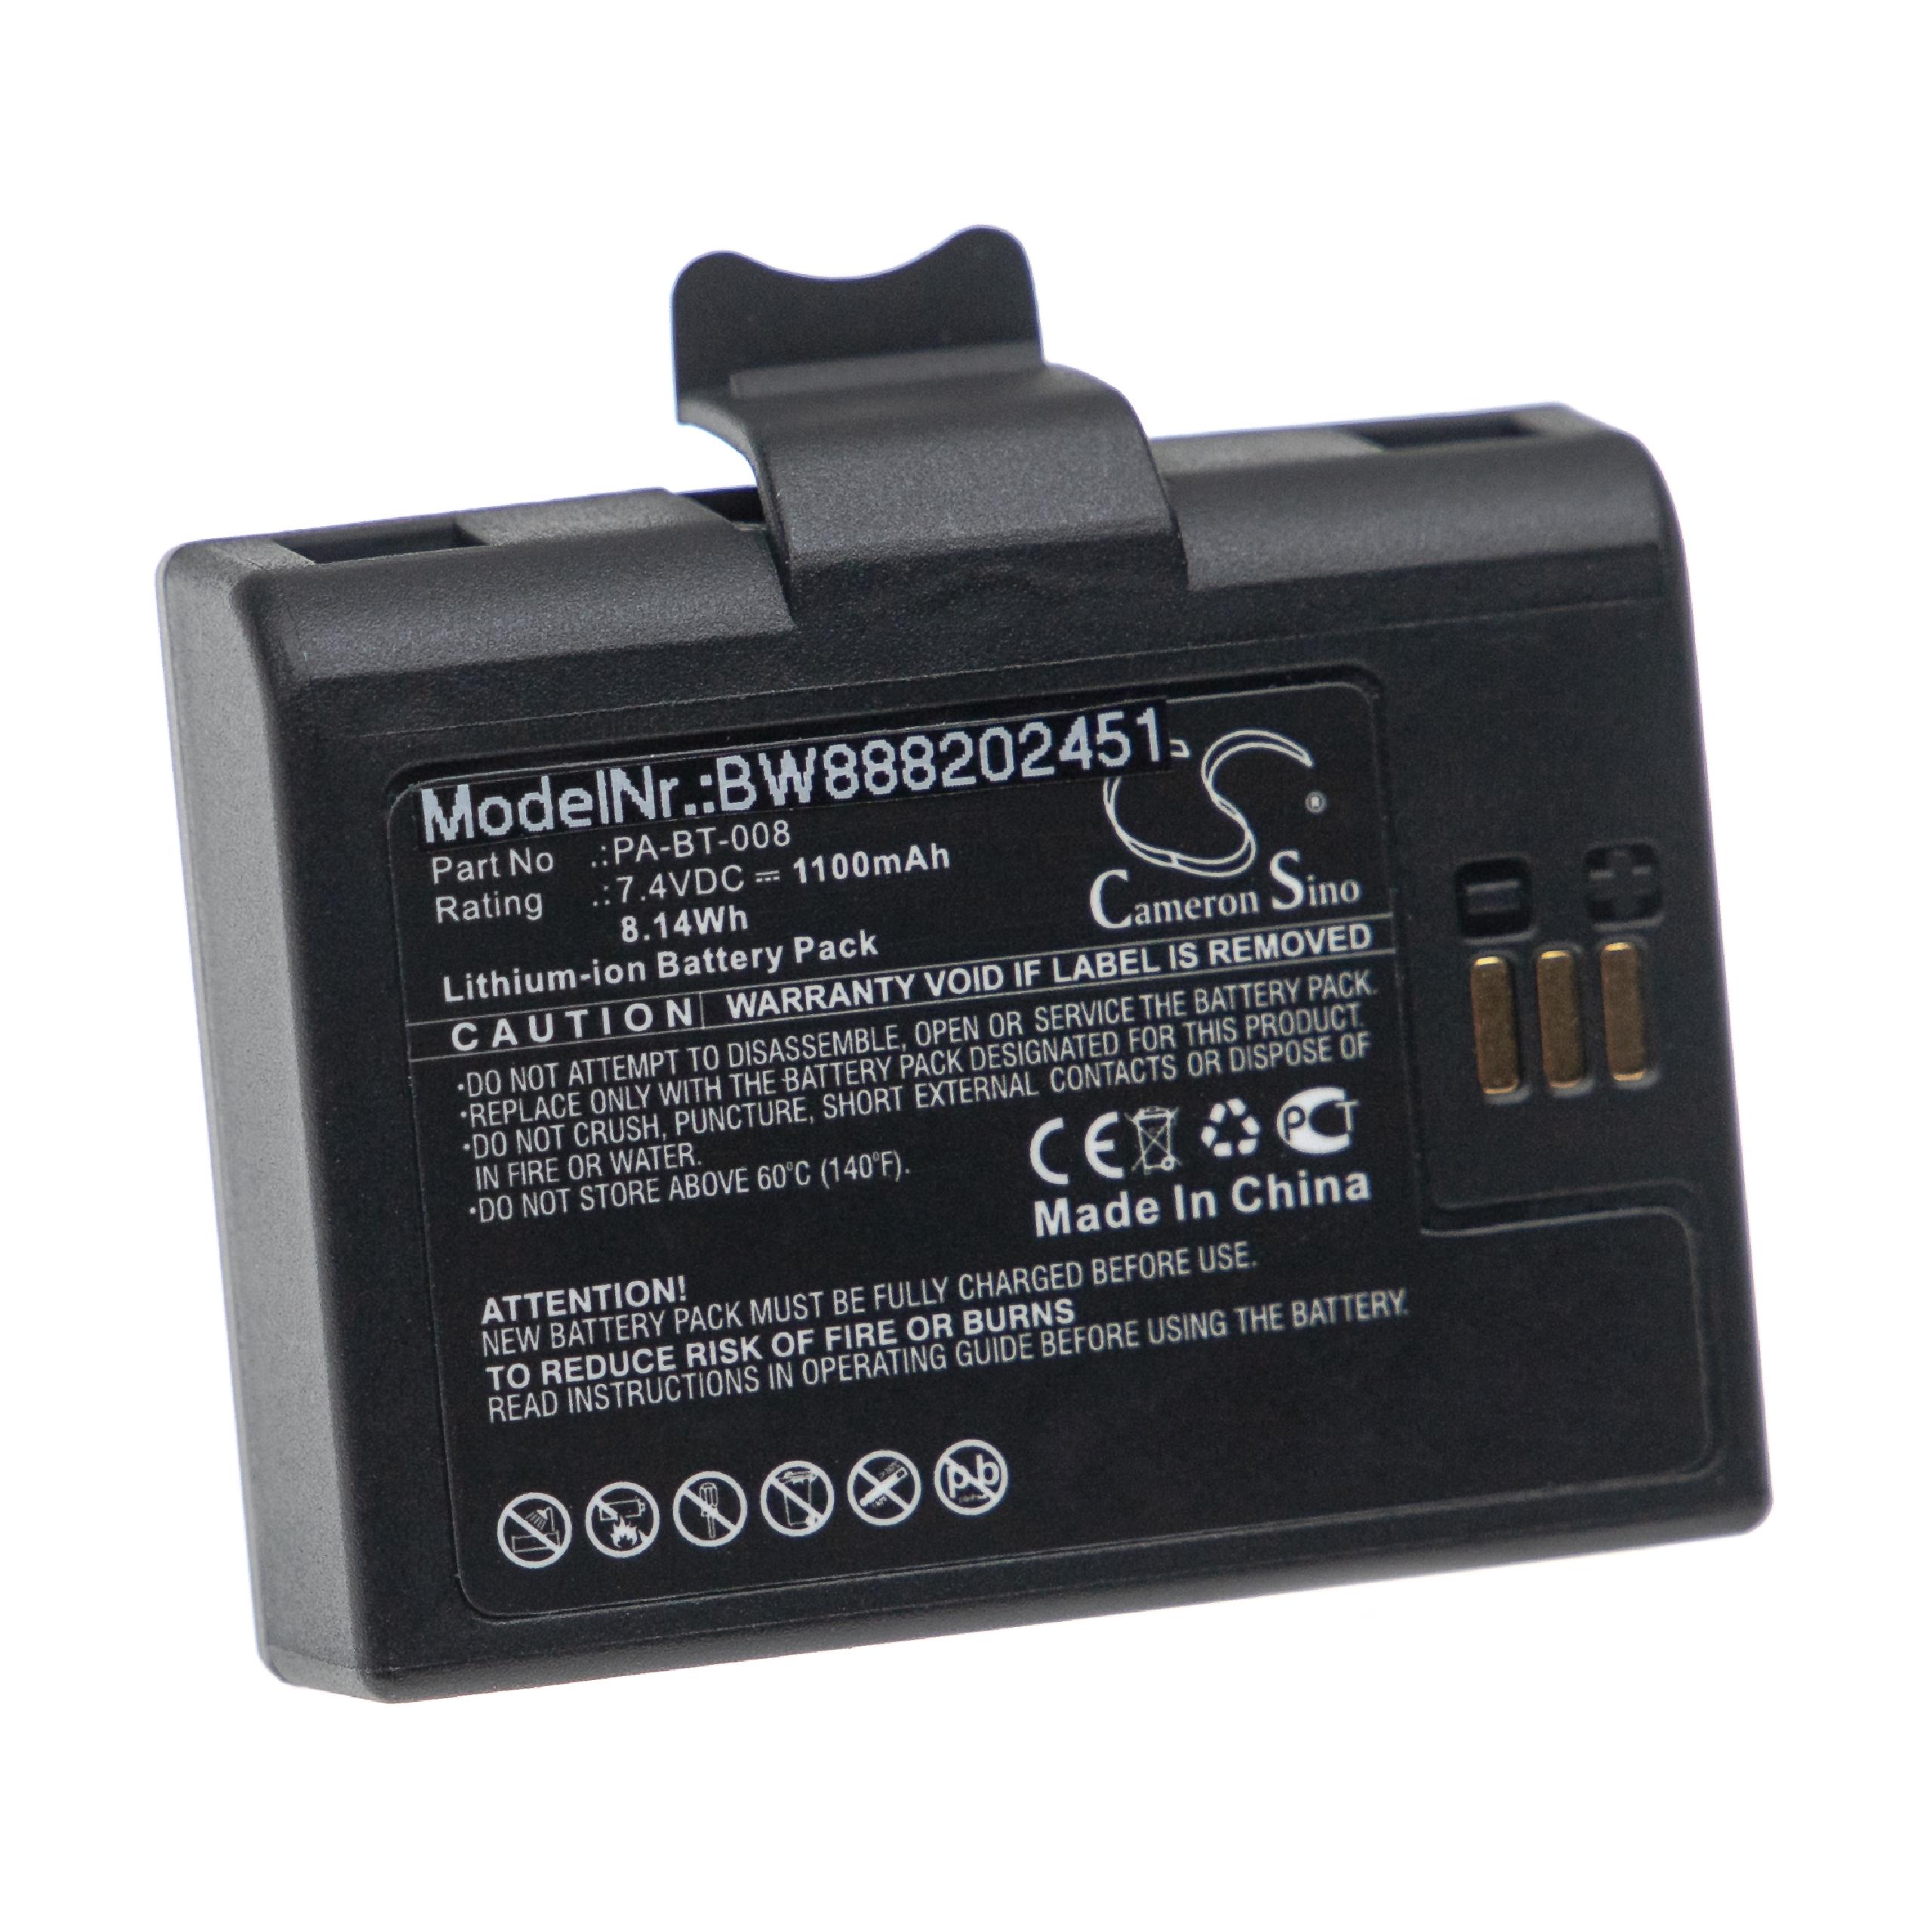 Printer Battery Replacement for Brother PA-BT-008 - 1100mAh 7.4V Li-Ion